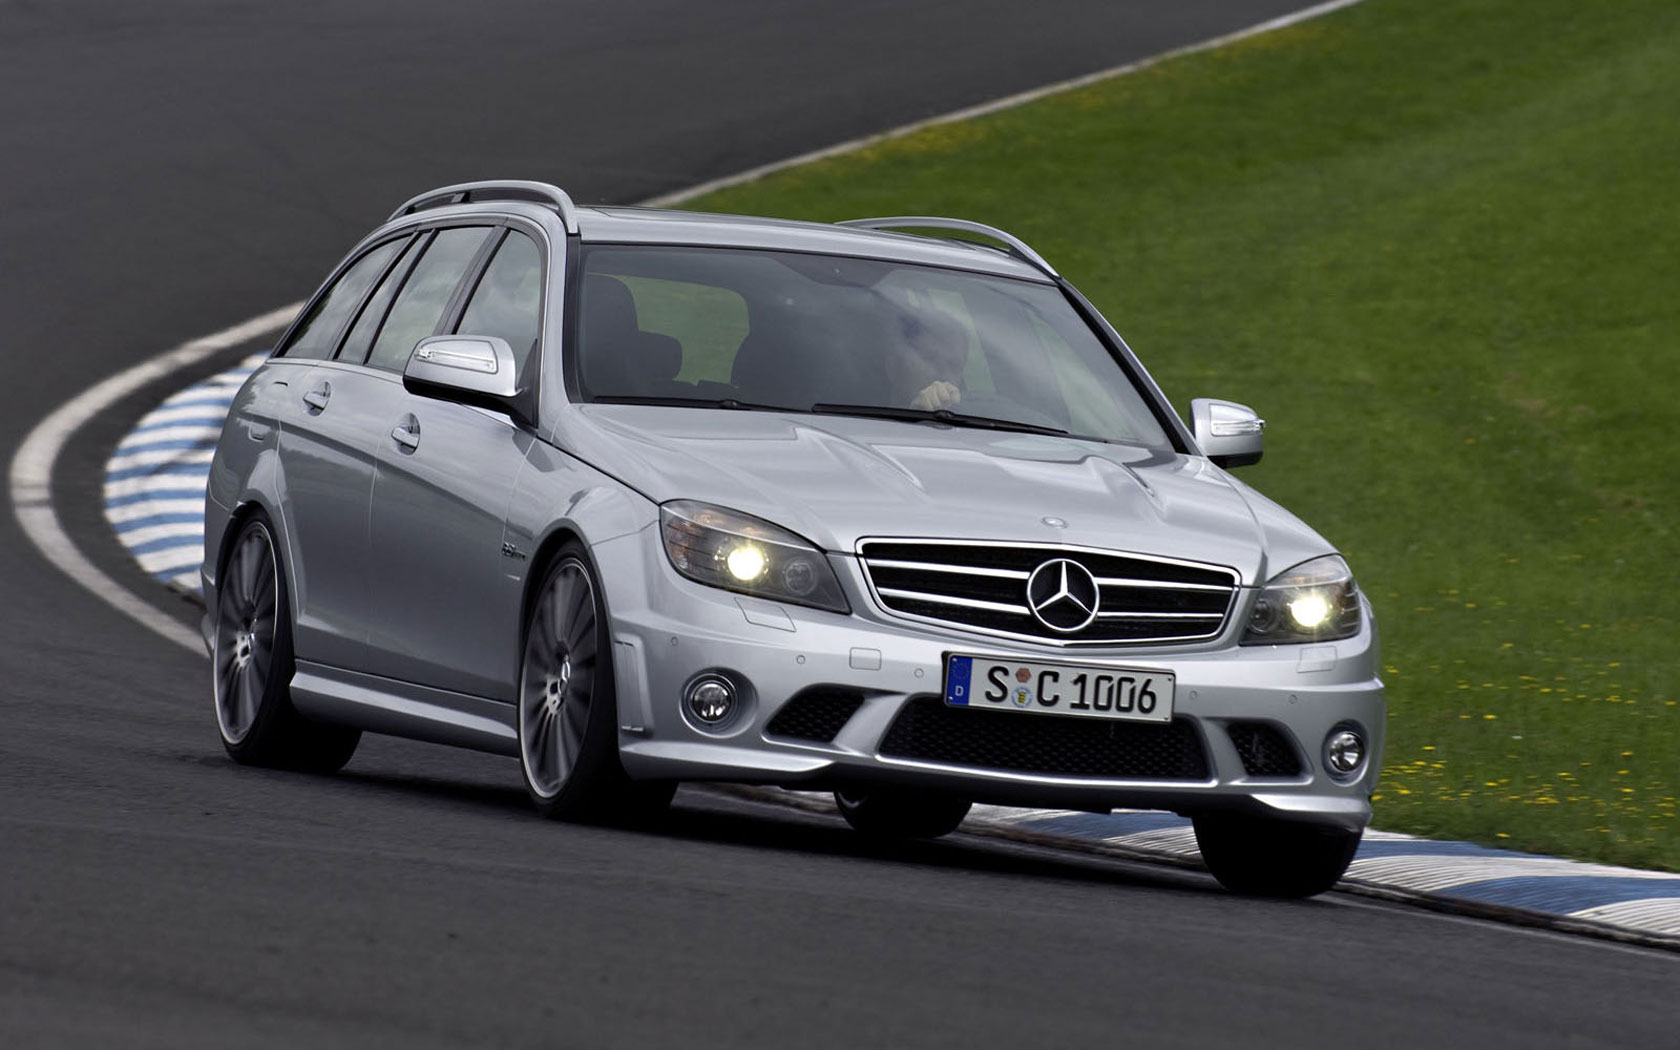  Mercedes C-Class AMG Touring (2007-2010)